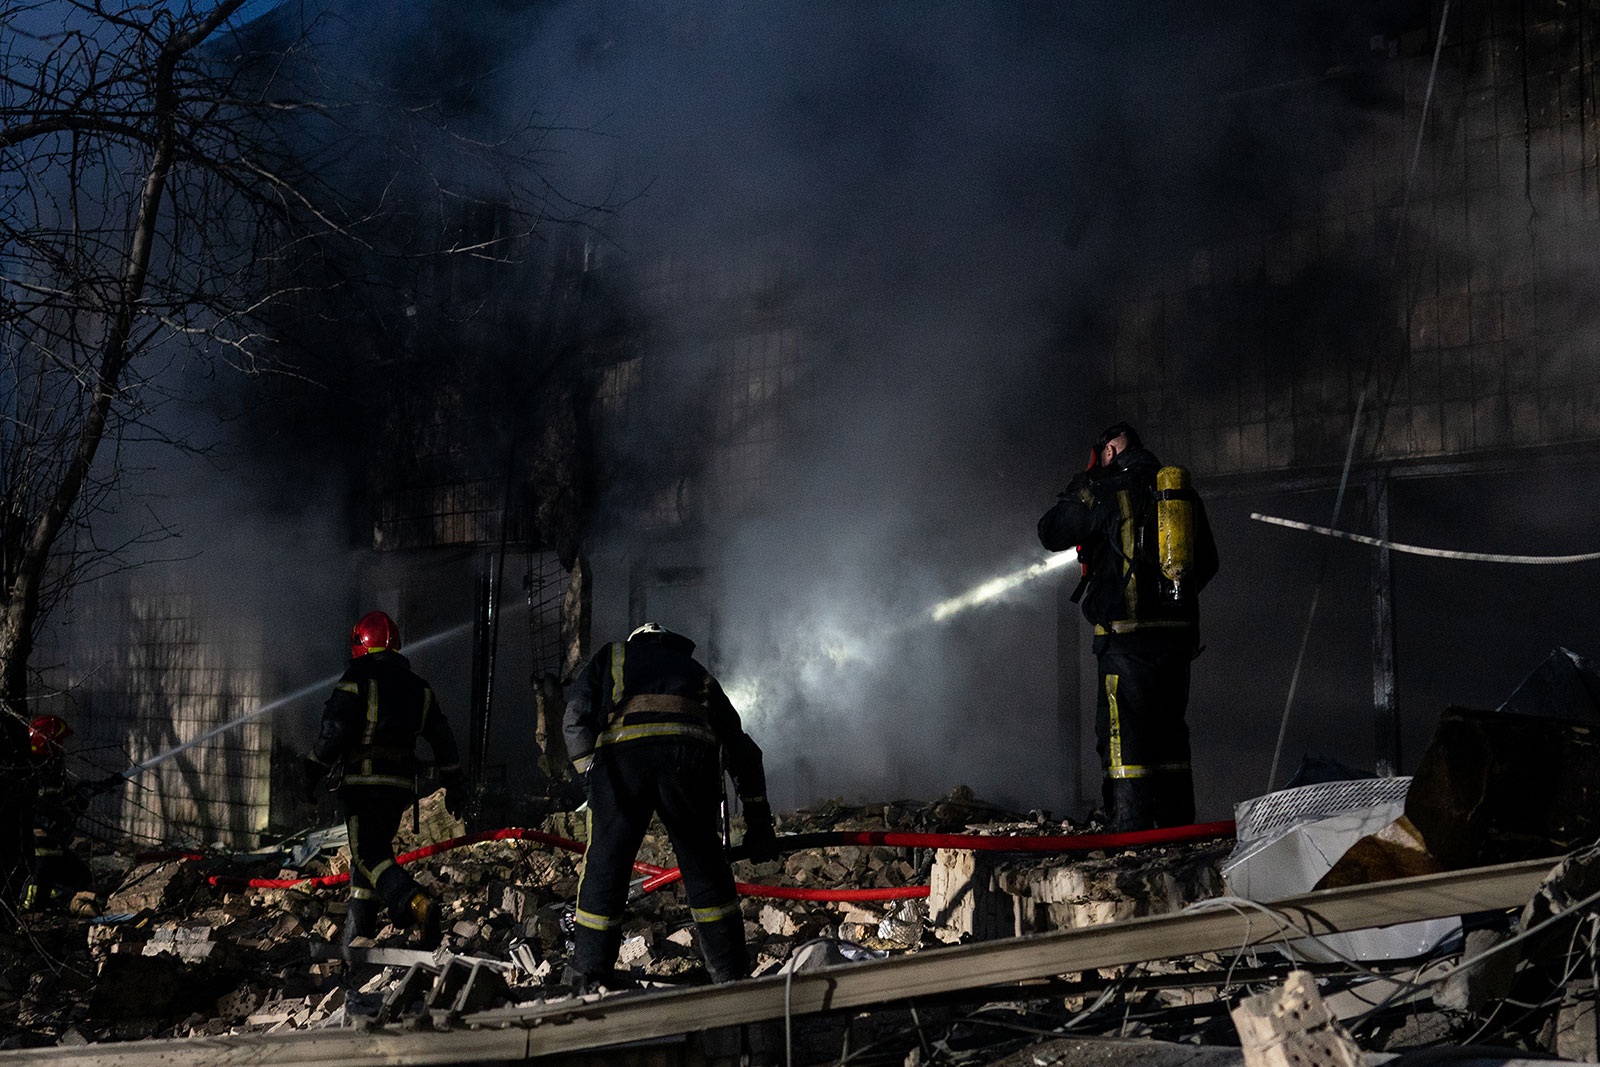 Emergency crews respond to the scene of an airstrike near Kyiv's TV tower on March 1. The nearby Babyn Yar Holocaust memorial site was also hit during the attack.